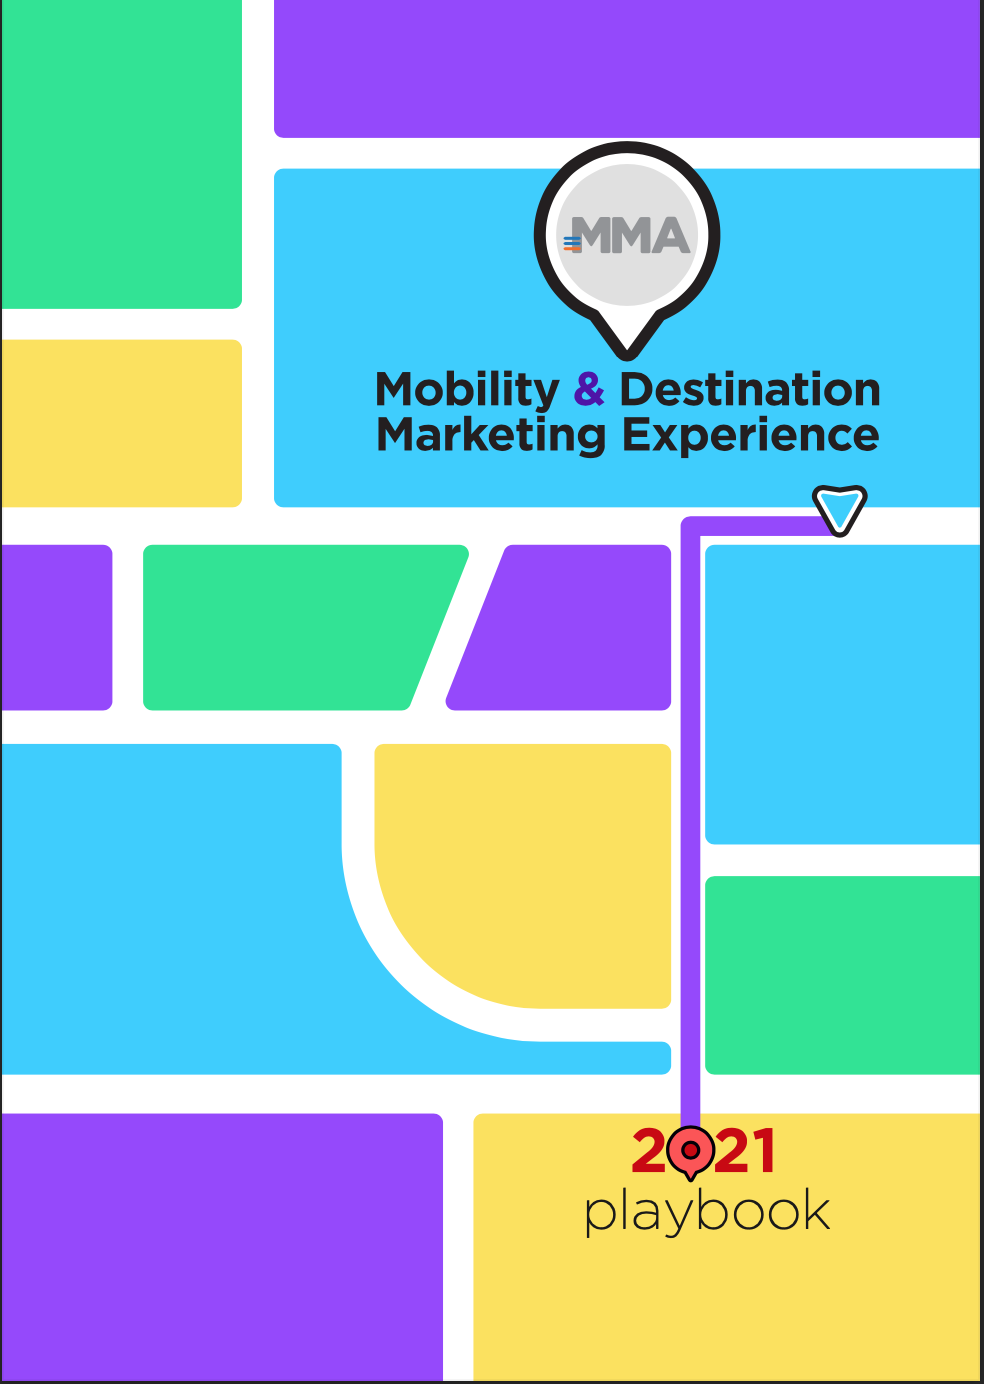 MMA Playbook Mobility & Destination Marketing Experience